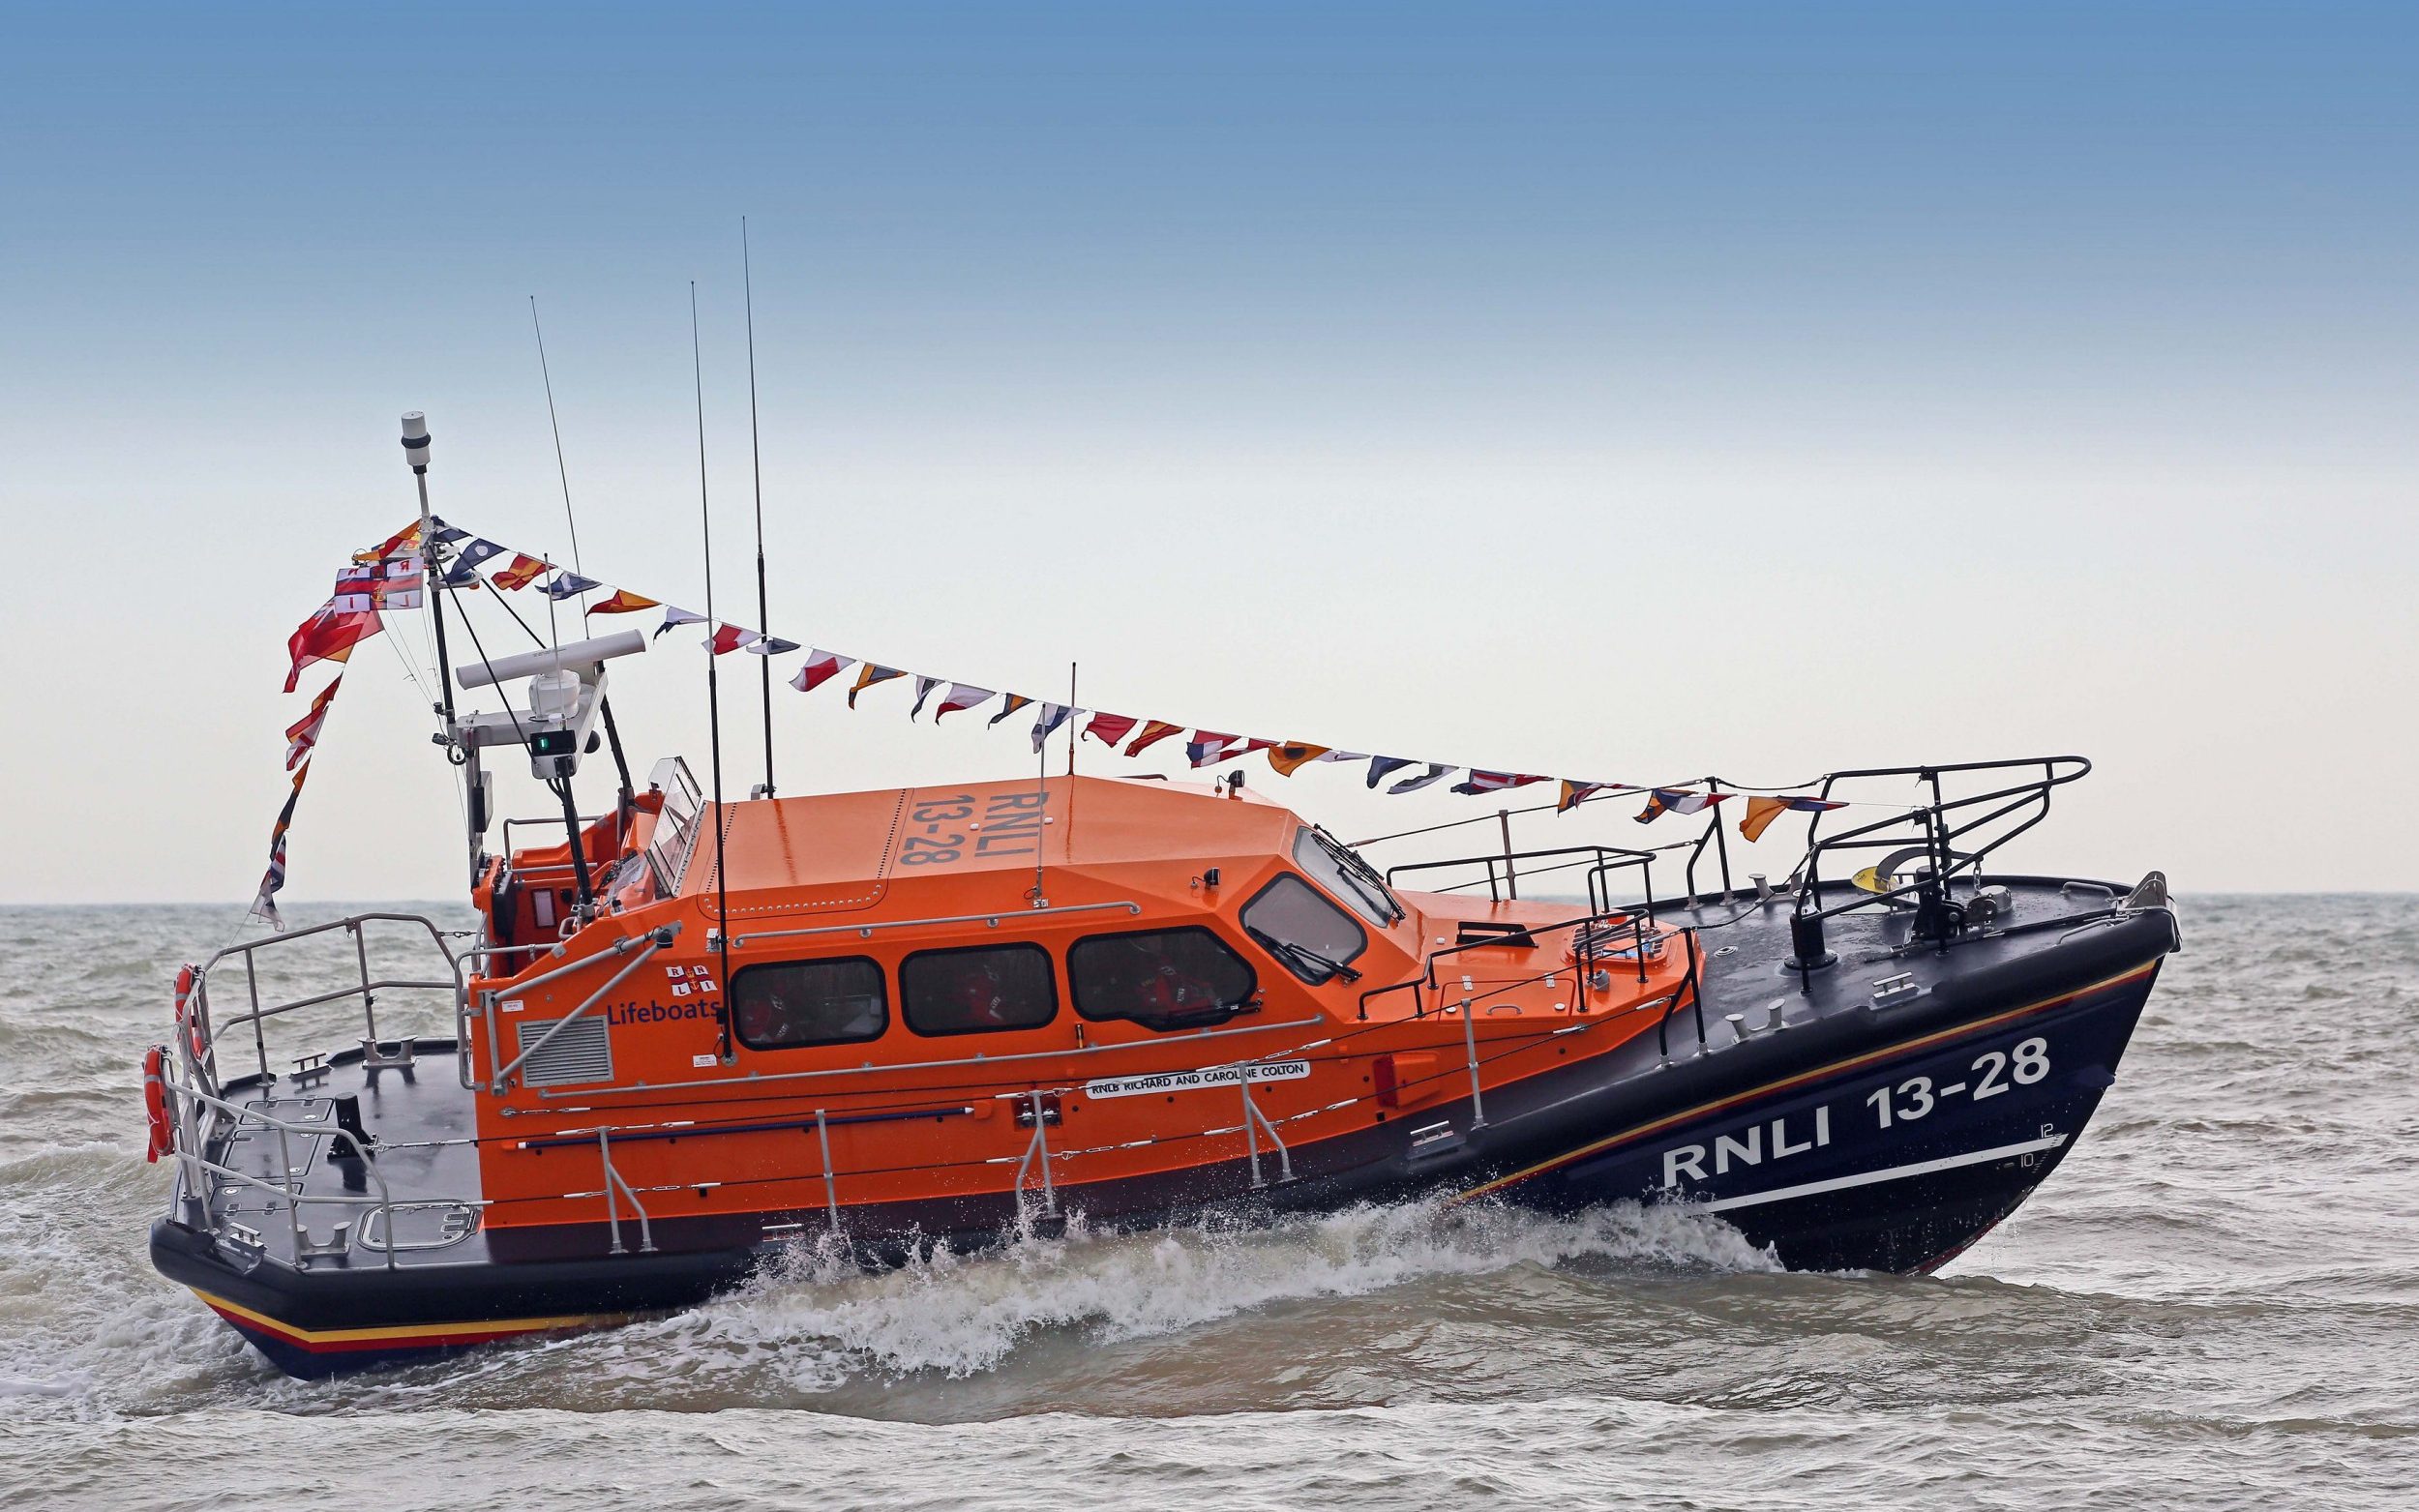 search called off after reports of pleasure boat debris in channel